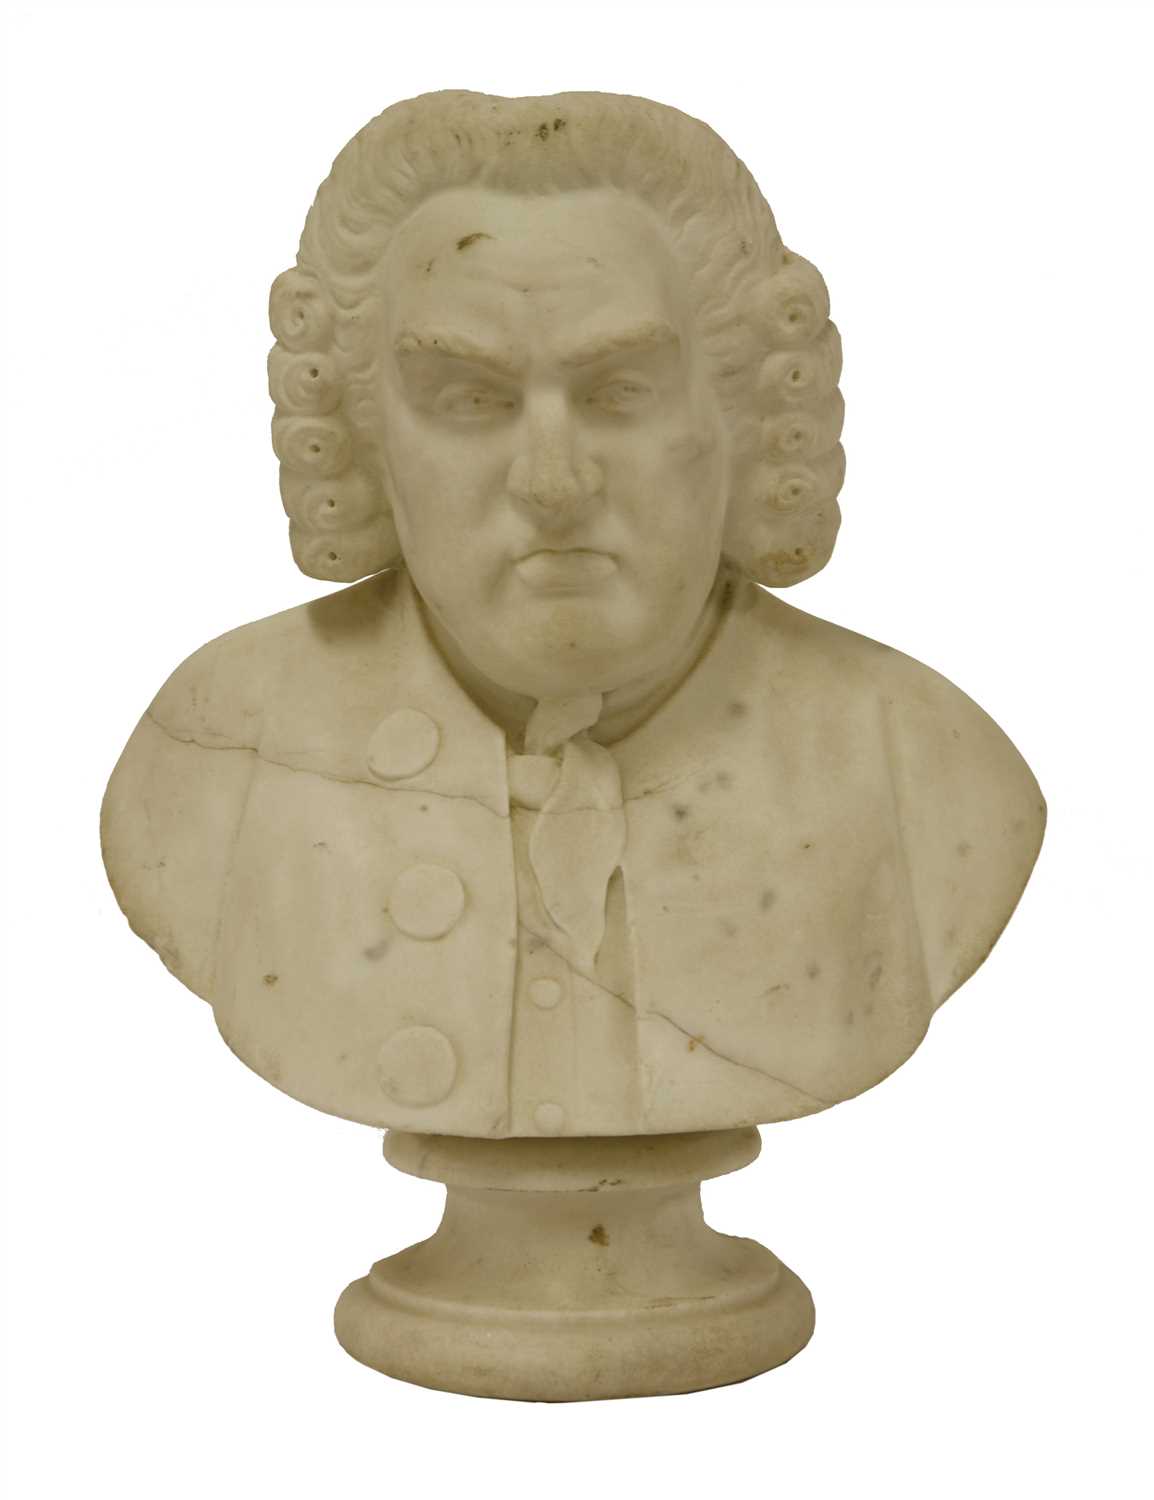 Lot 217 - A carved marble bust of a gentleman, possibly Samuel Johnson